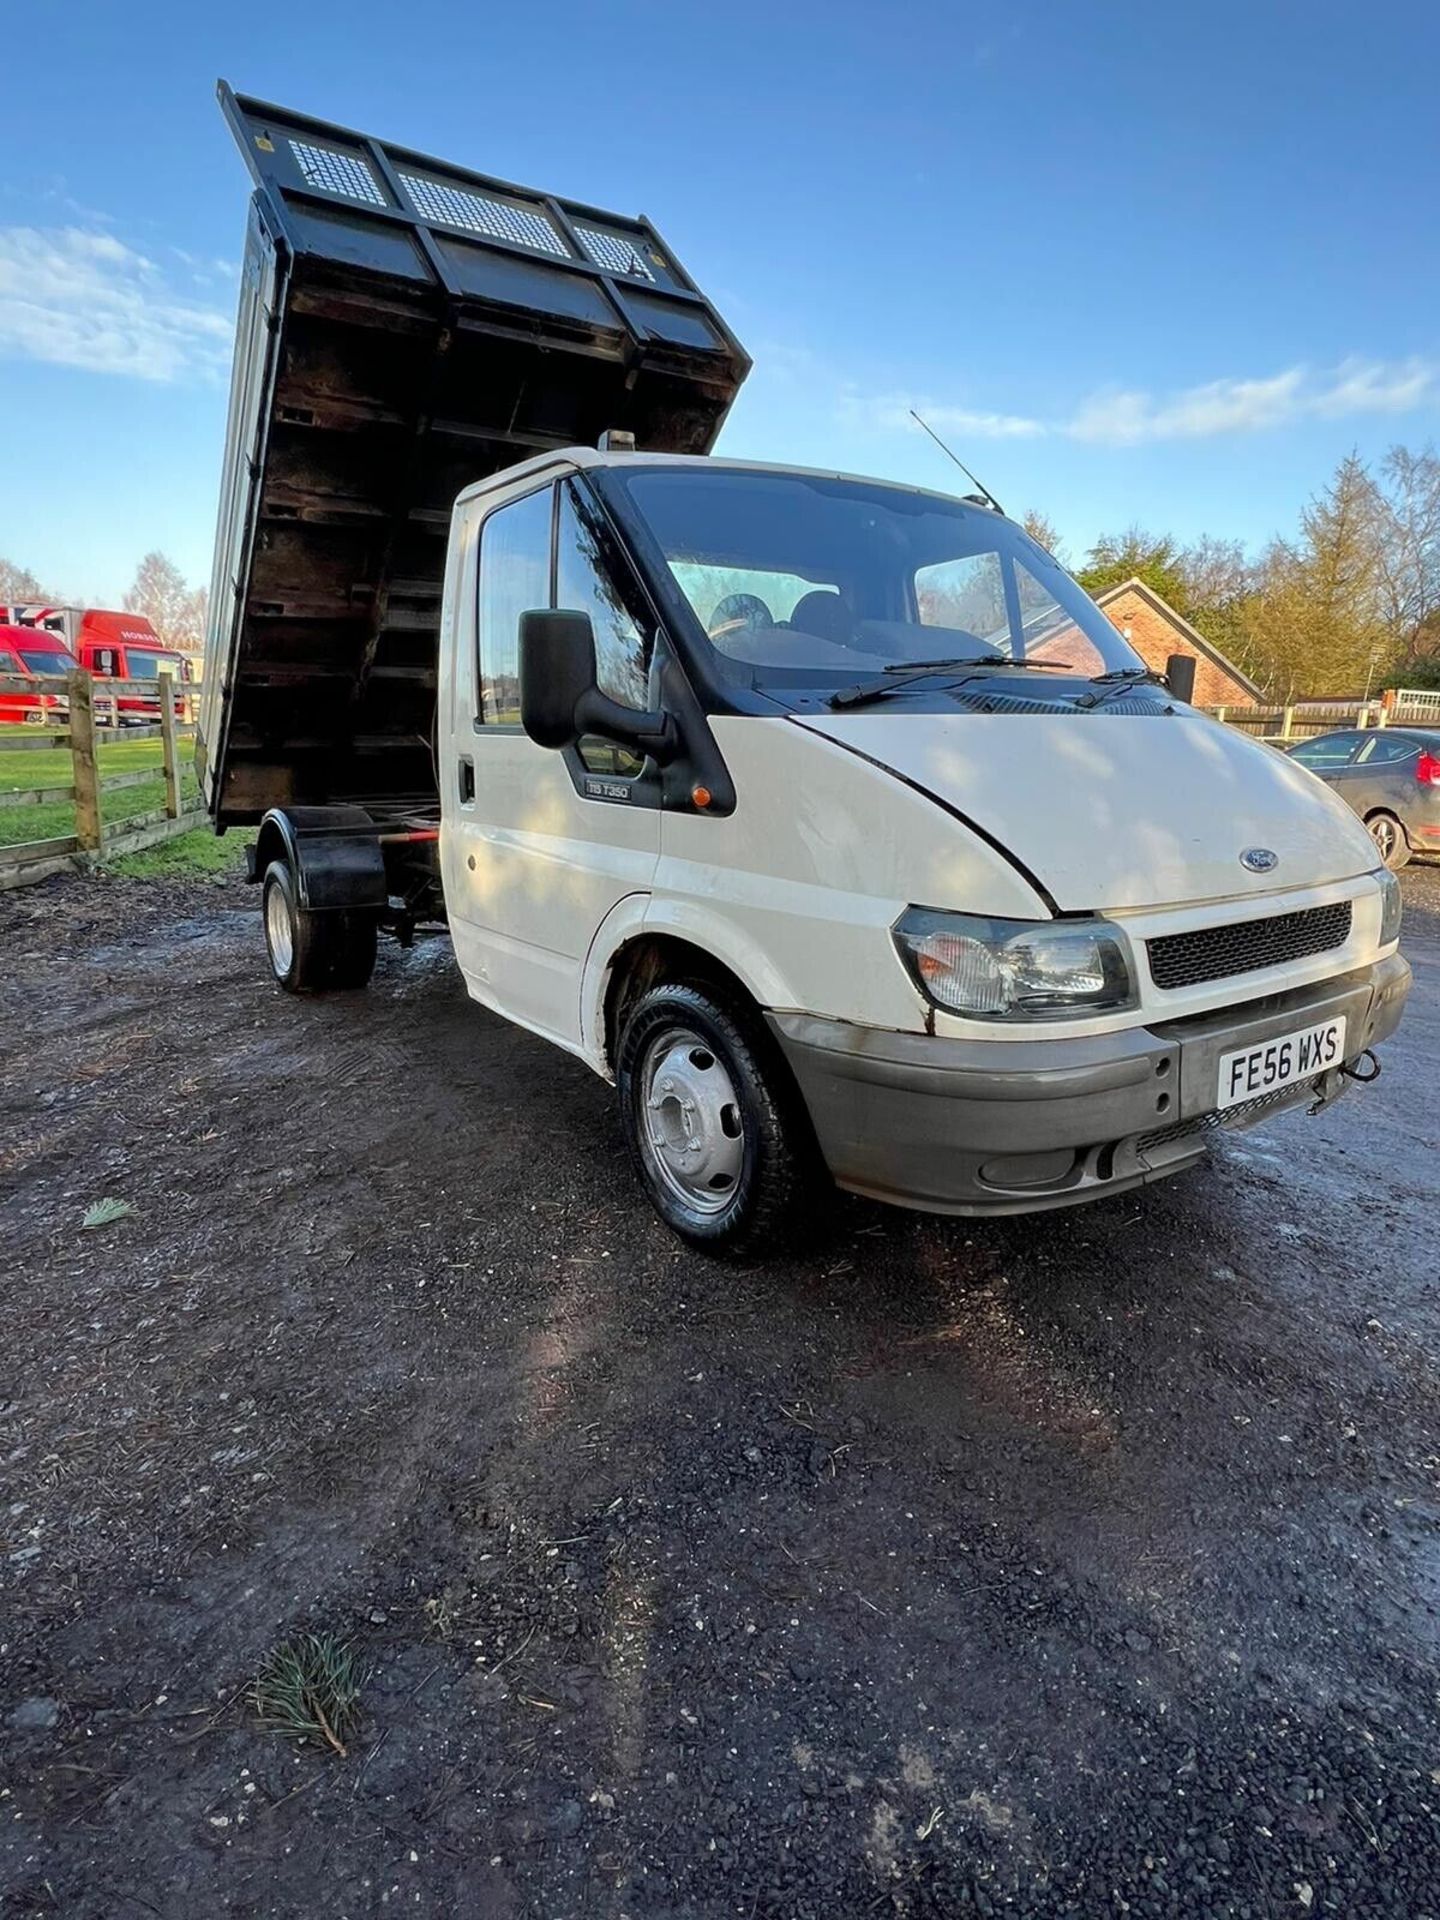 FORD TRANSIT TIPPER LORRY TWIN WHEEL TIPPING TRUCK LONG TEST MANUAL 120K 2006 - Image 9 of 12